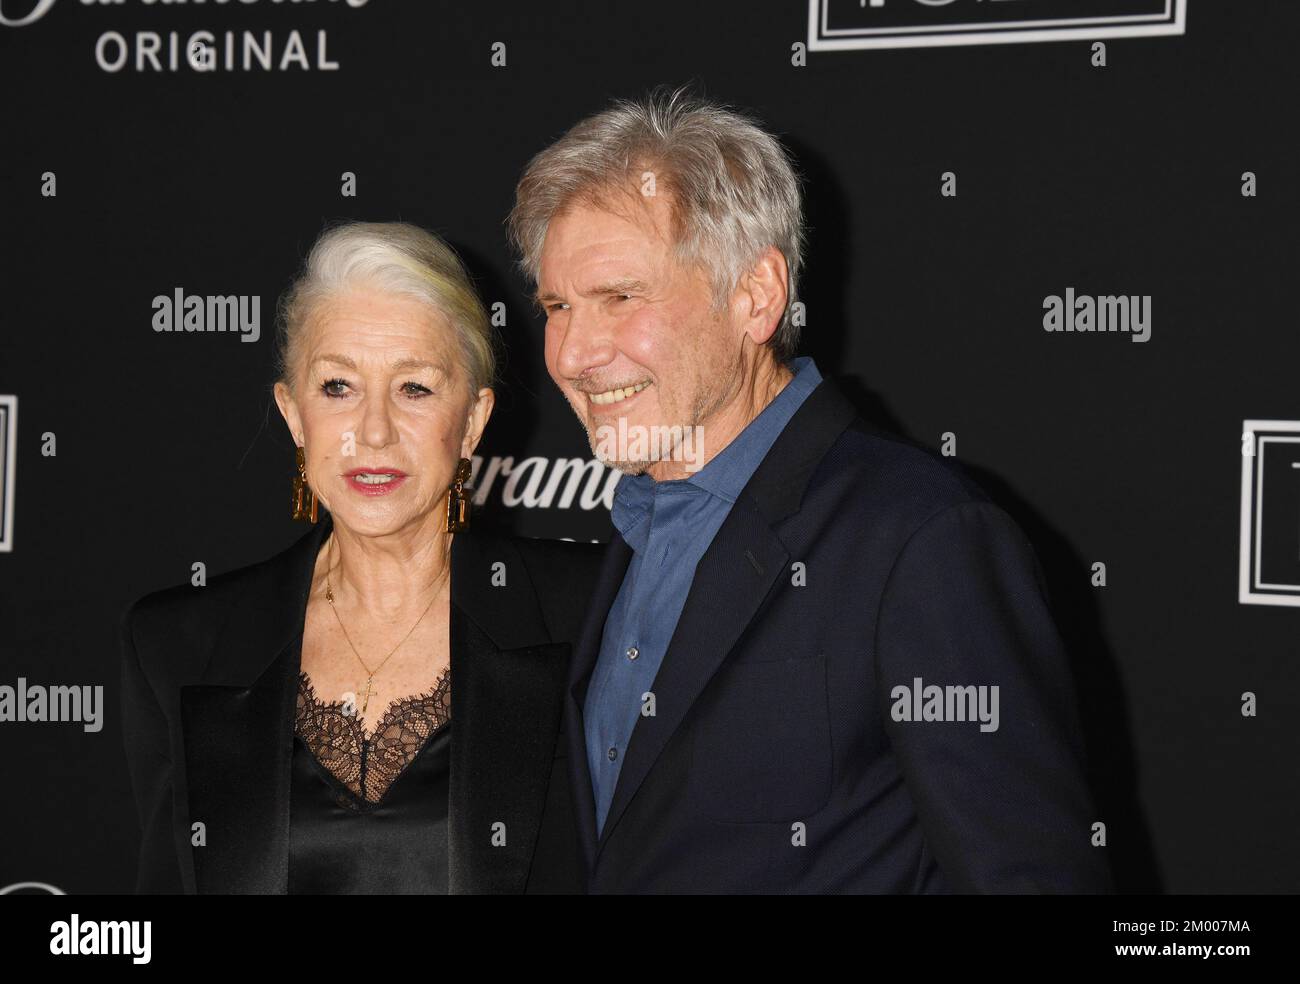 LOS ANGELES, CALIFORNIA - DECEMBER 02: (L-R) Helen Mirren and Harrison Ford attend the Los Angeles Premiere Of Paramount+'s '1923' at Hollywood Americ Stock Photo